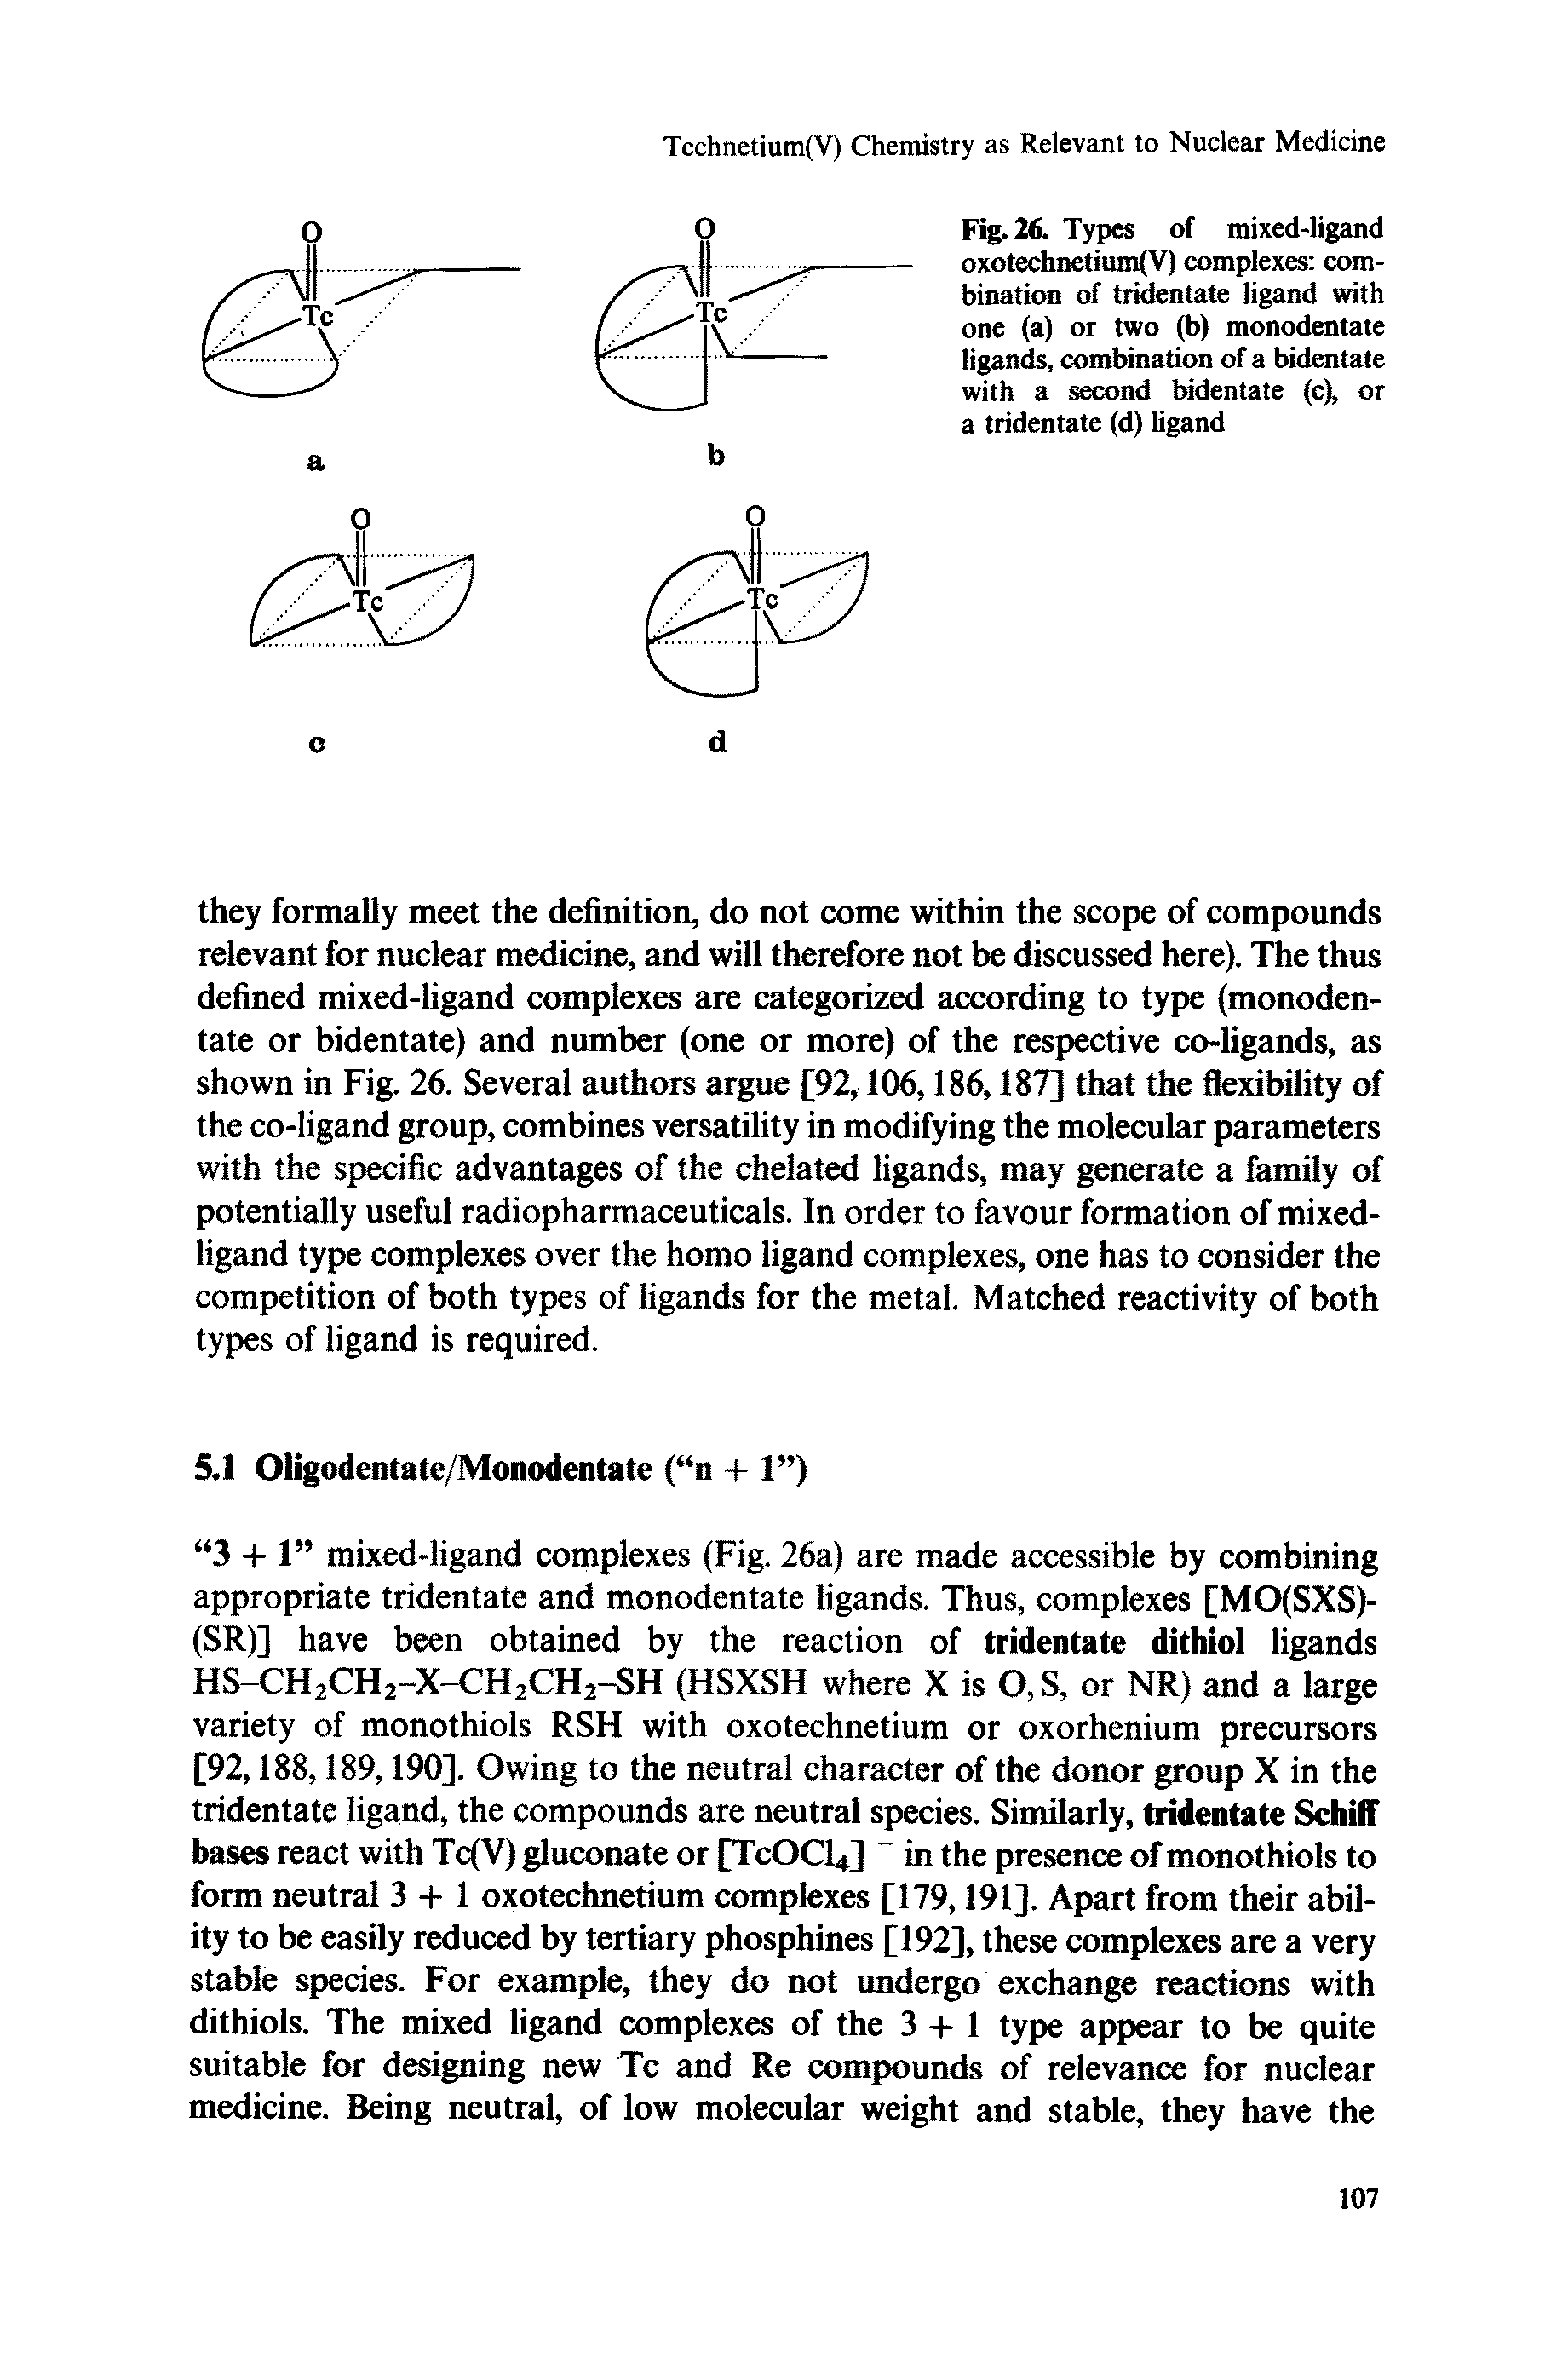 Fig. 26. Types of mixed-ligand oxotechnetium V) complexes combination of tridentate ligand with one (a) or two (b) monodentate ligands, combination of a bidentate with a second bidentate (c), or a tridentate (d) ligand...